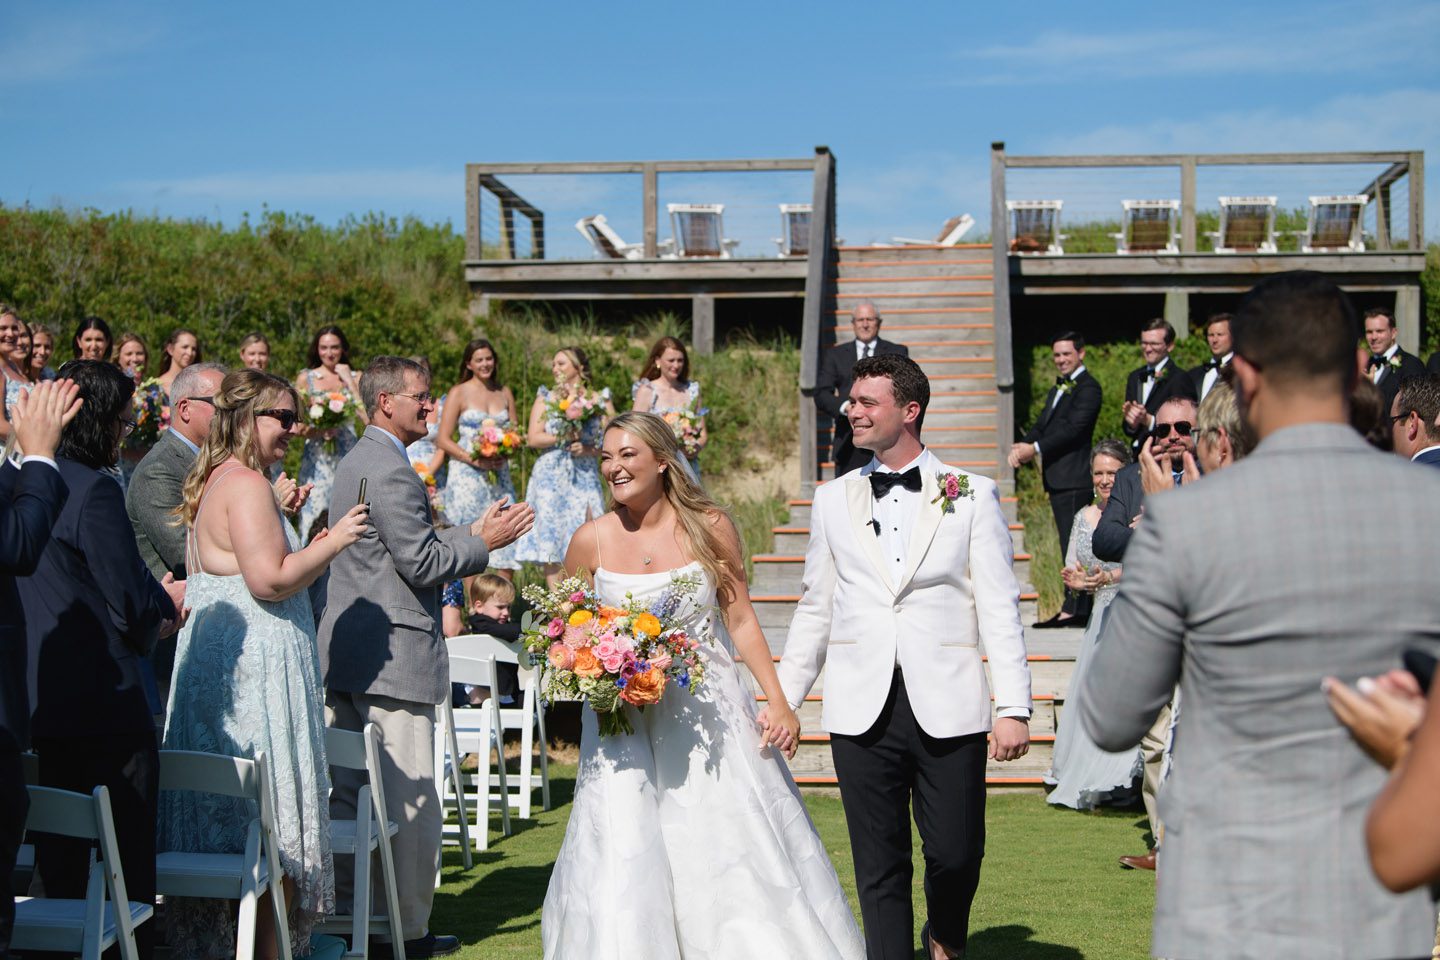 Bride and Groom walking down the aisle at their Outer Banks wedding